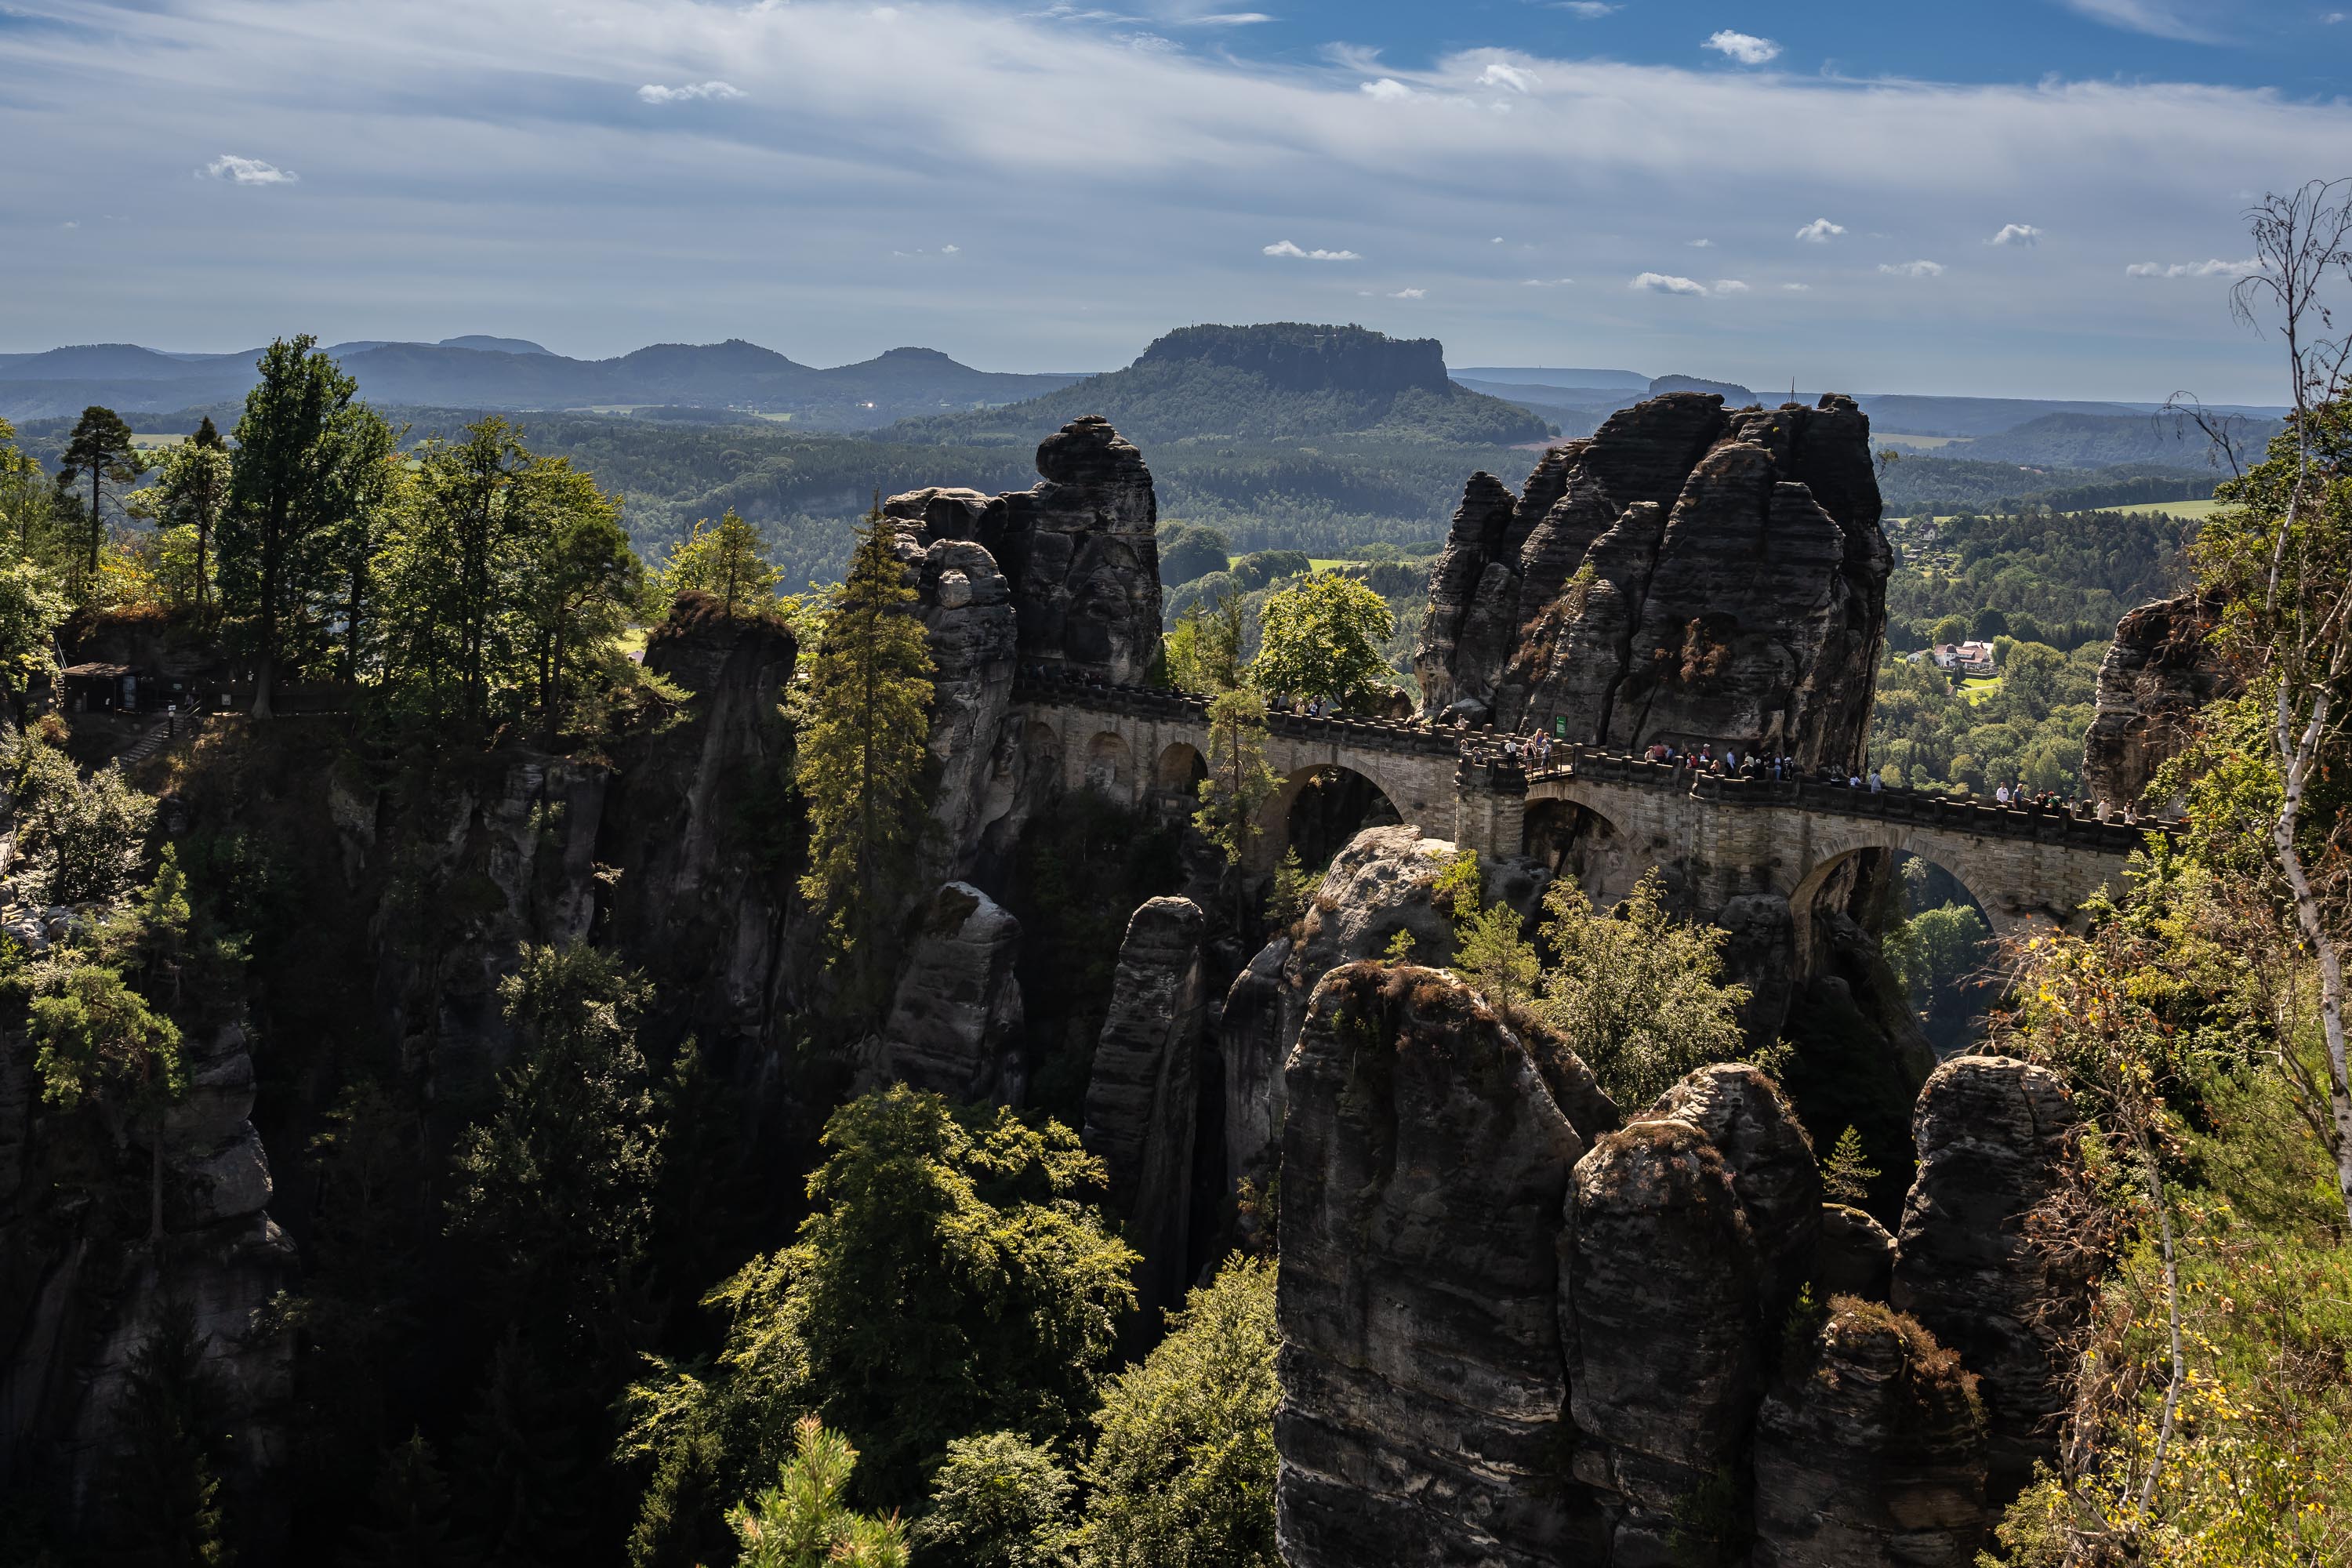 The Bastei is a rock formation rising just shy of 650 feet above the Elbe River